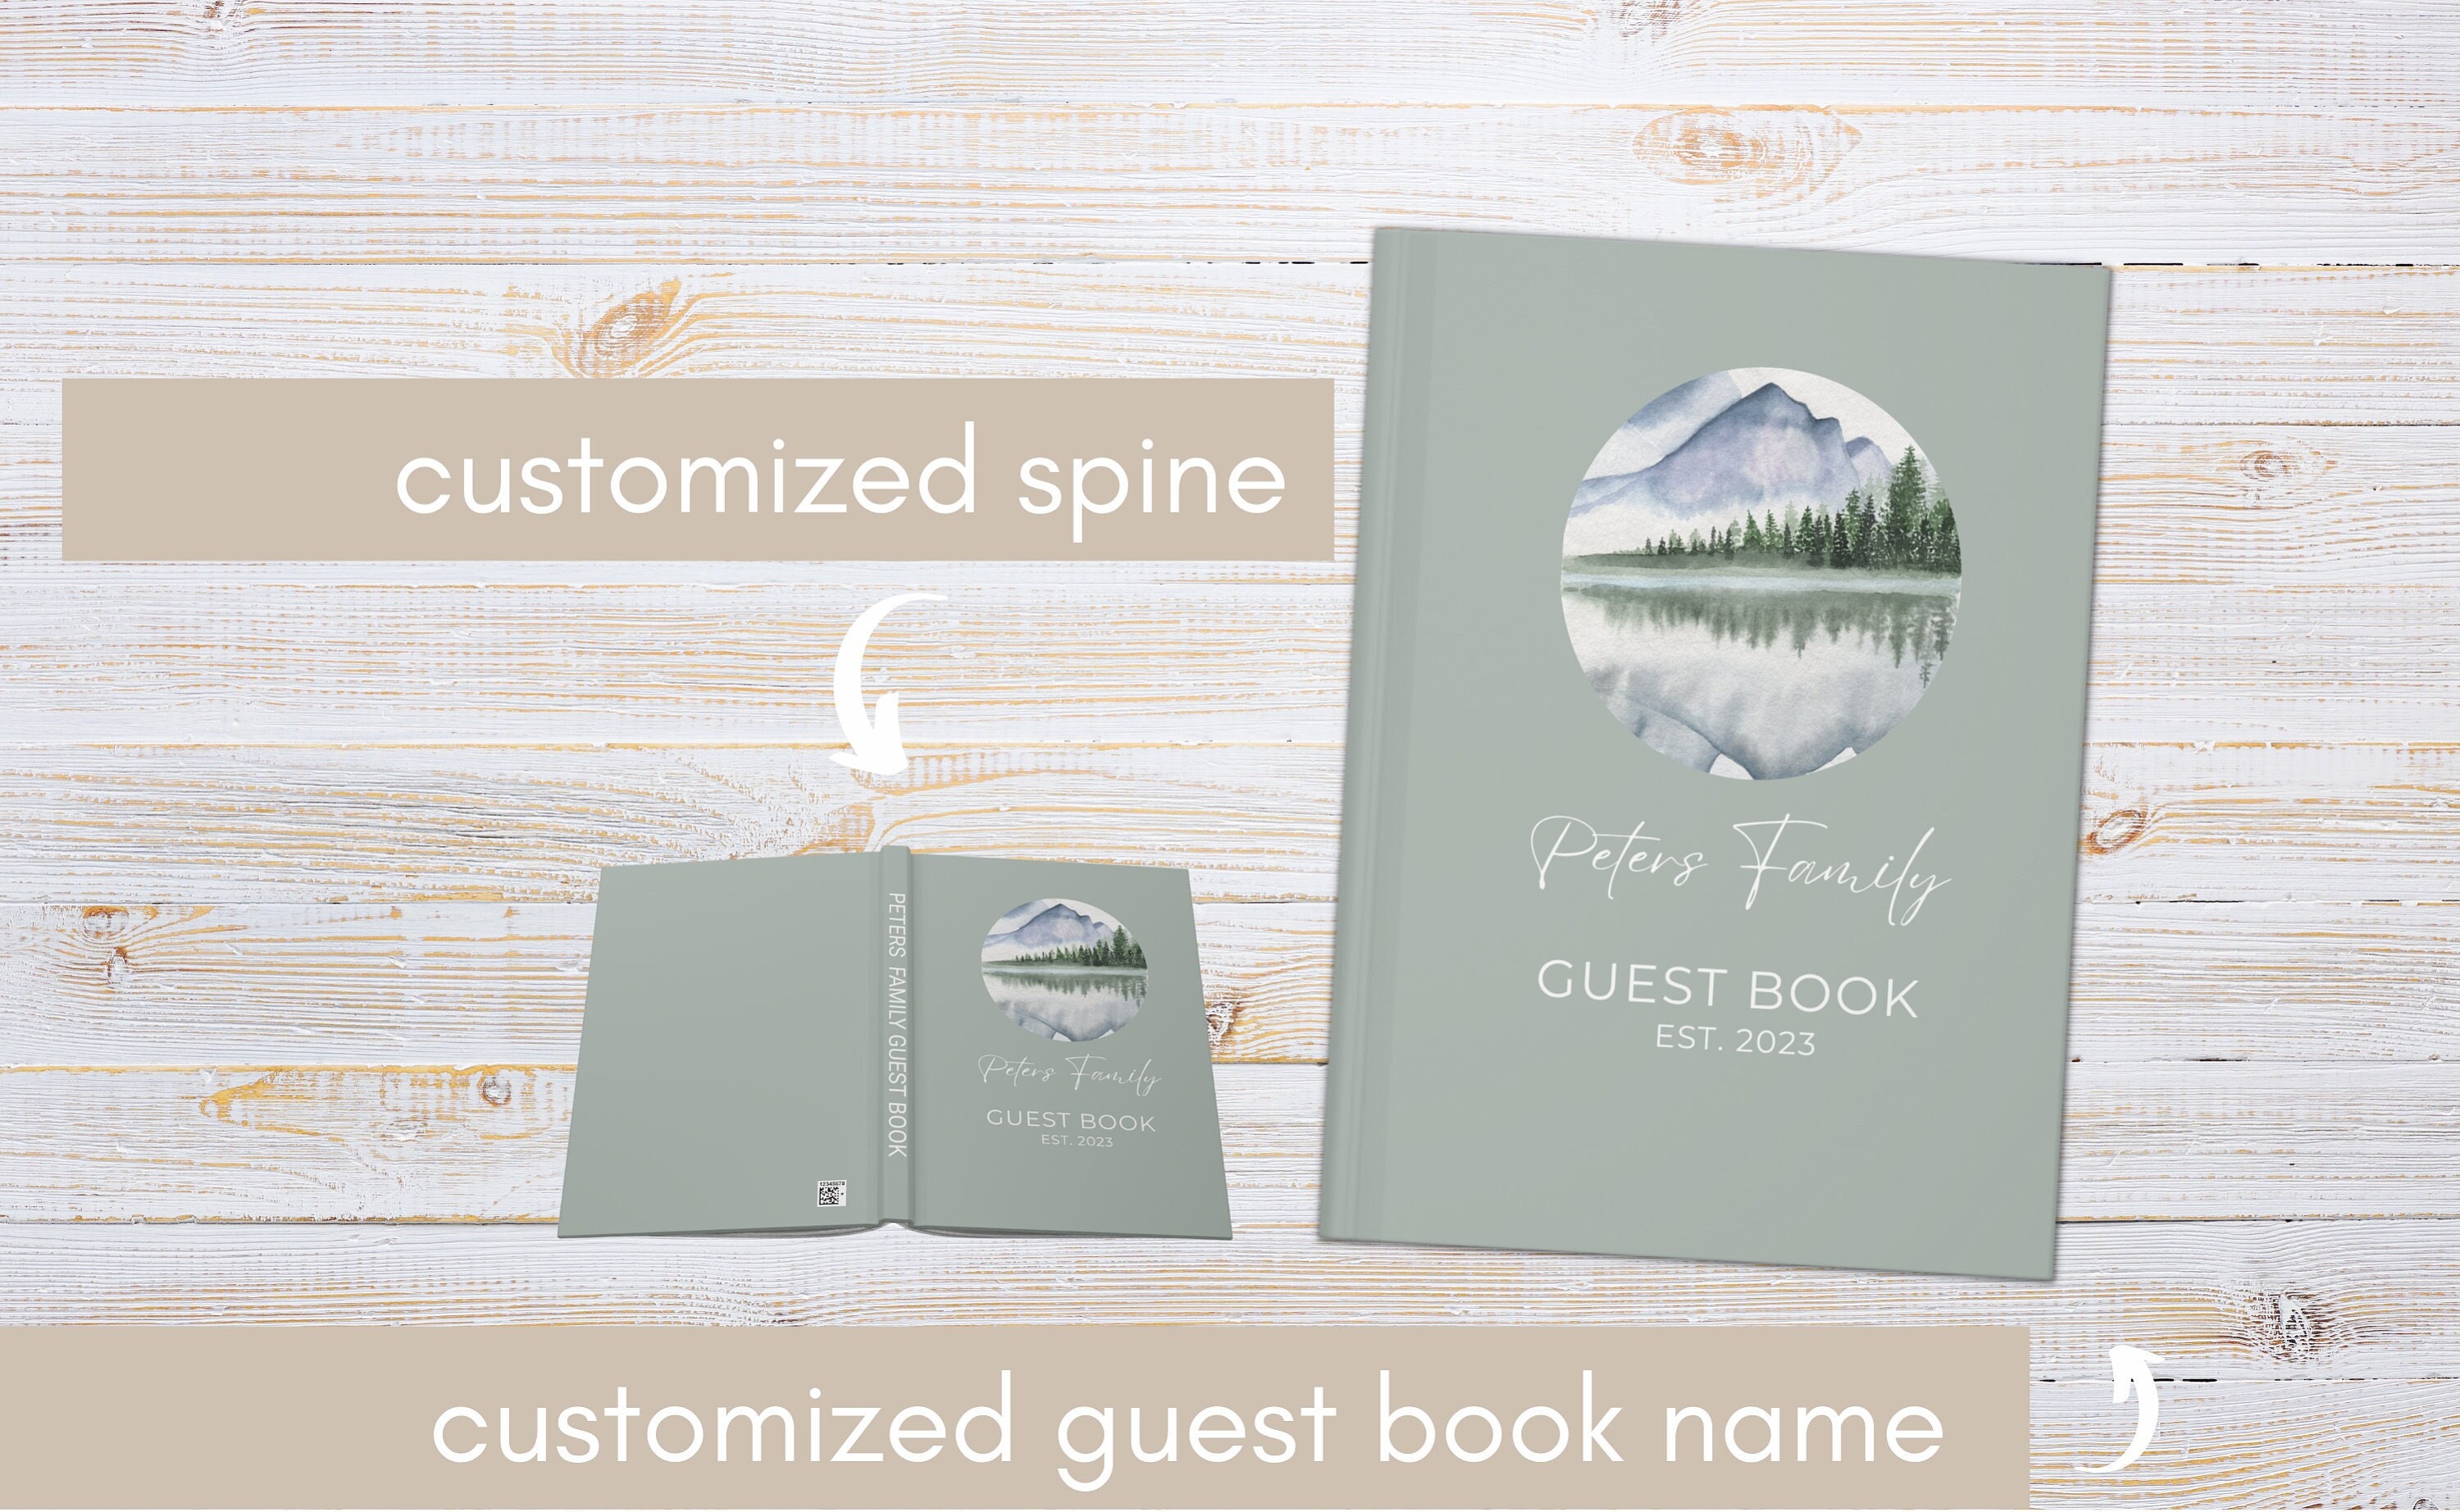 Custom Guest Book for Beach House, Beach Vacation Rental House Guest  Comment Book, Personalized Engraved Guestbook for Beach Home 